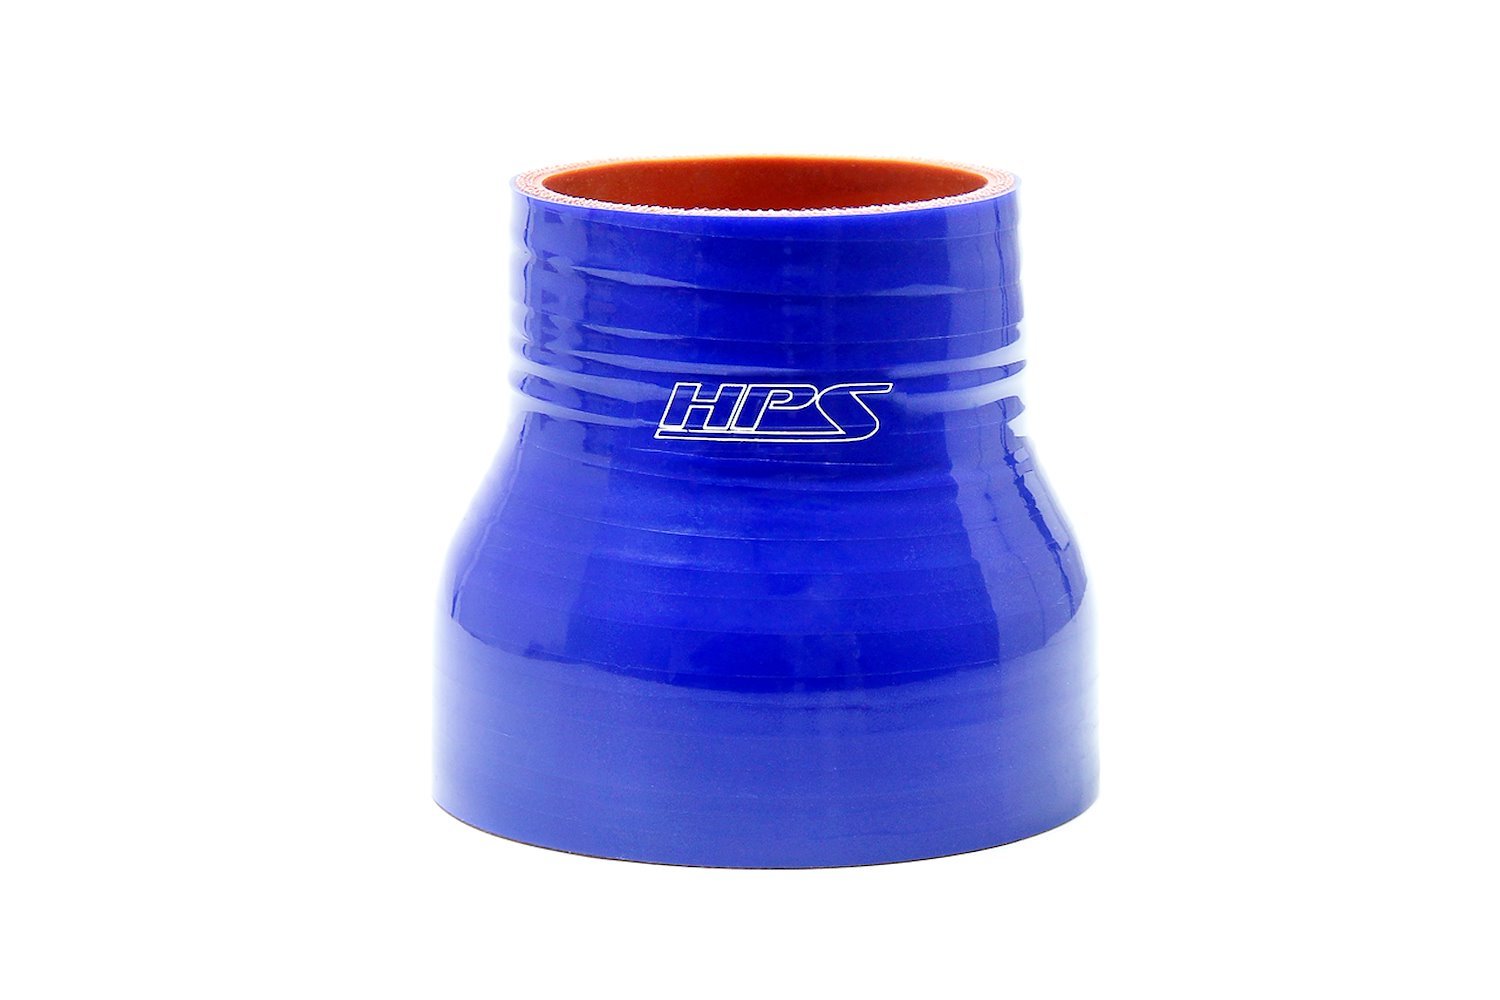 HTSR-325-350-BLUE Silicone Reducer Hose, High-Temp 4-Ply Reinforced, 3-1/4 in. - 3-1/2 in. ID, 3 in. Long, Blue